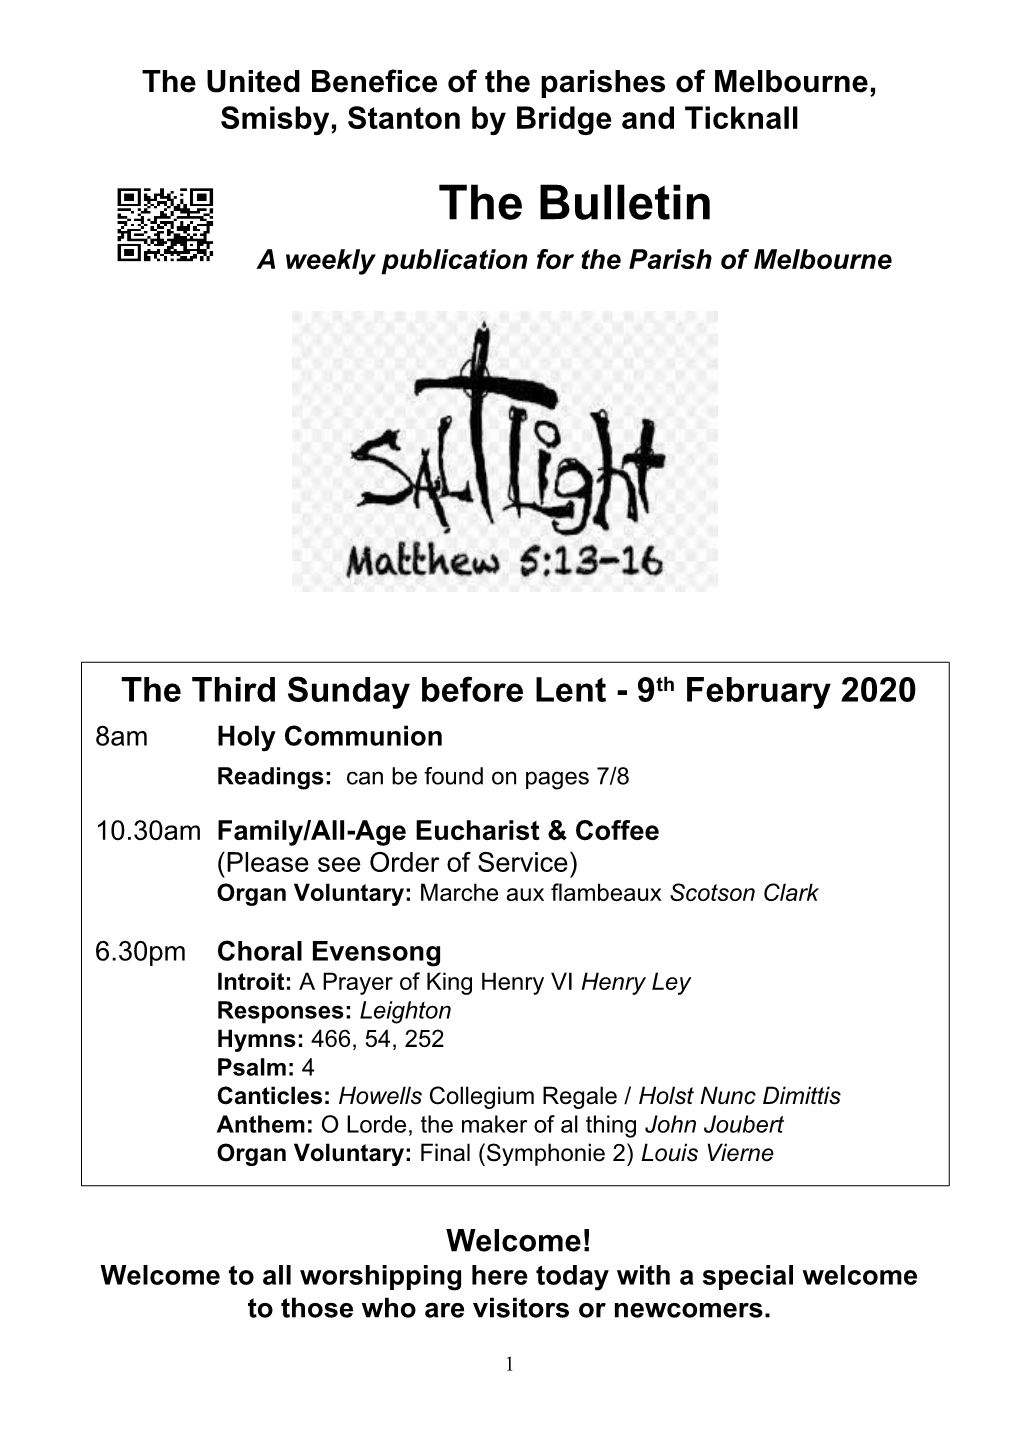 The Bulletin a Weekly Publication for the Parish of Melbourne